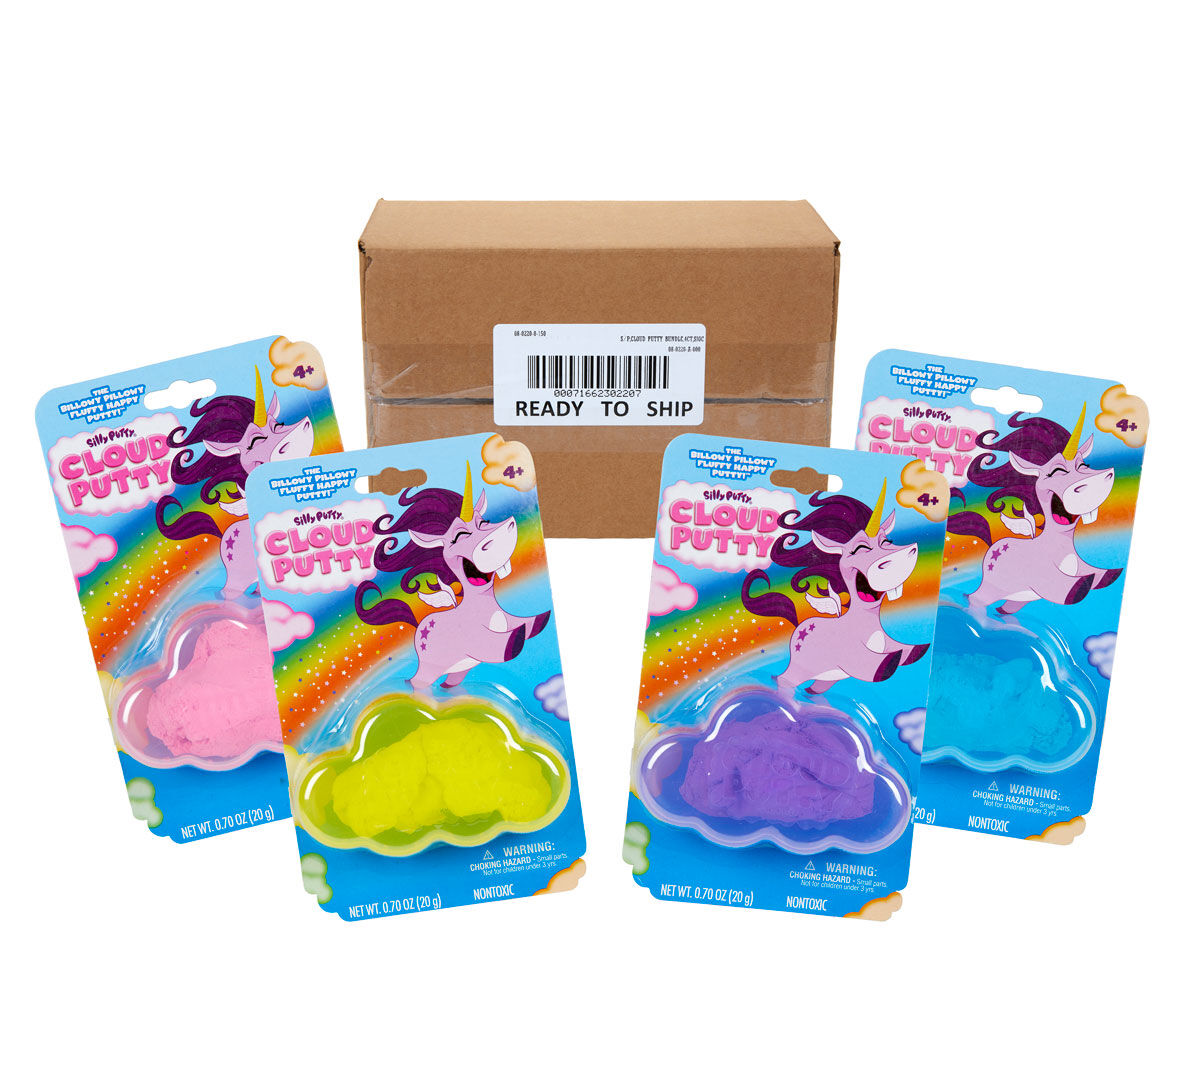 Crayola Silly Cloud Putty Unicorn Magical Giggles Pink Soft Fluffy Nontoxic 4 for sale online 